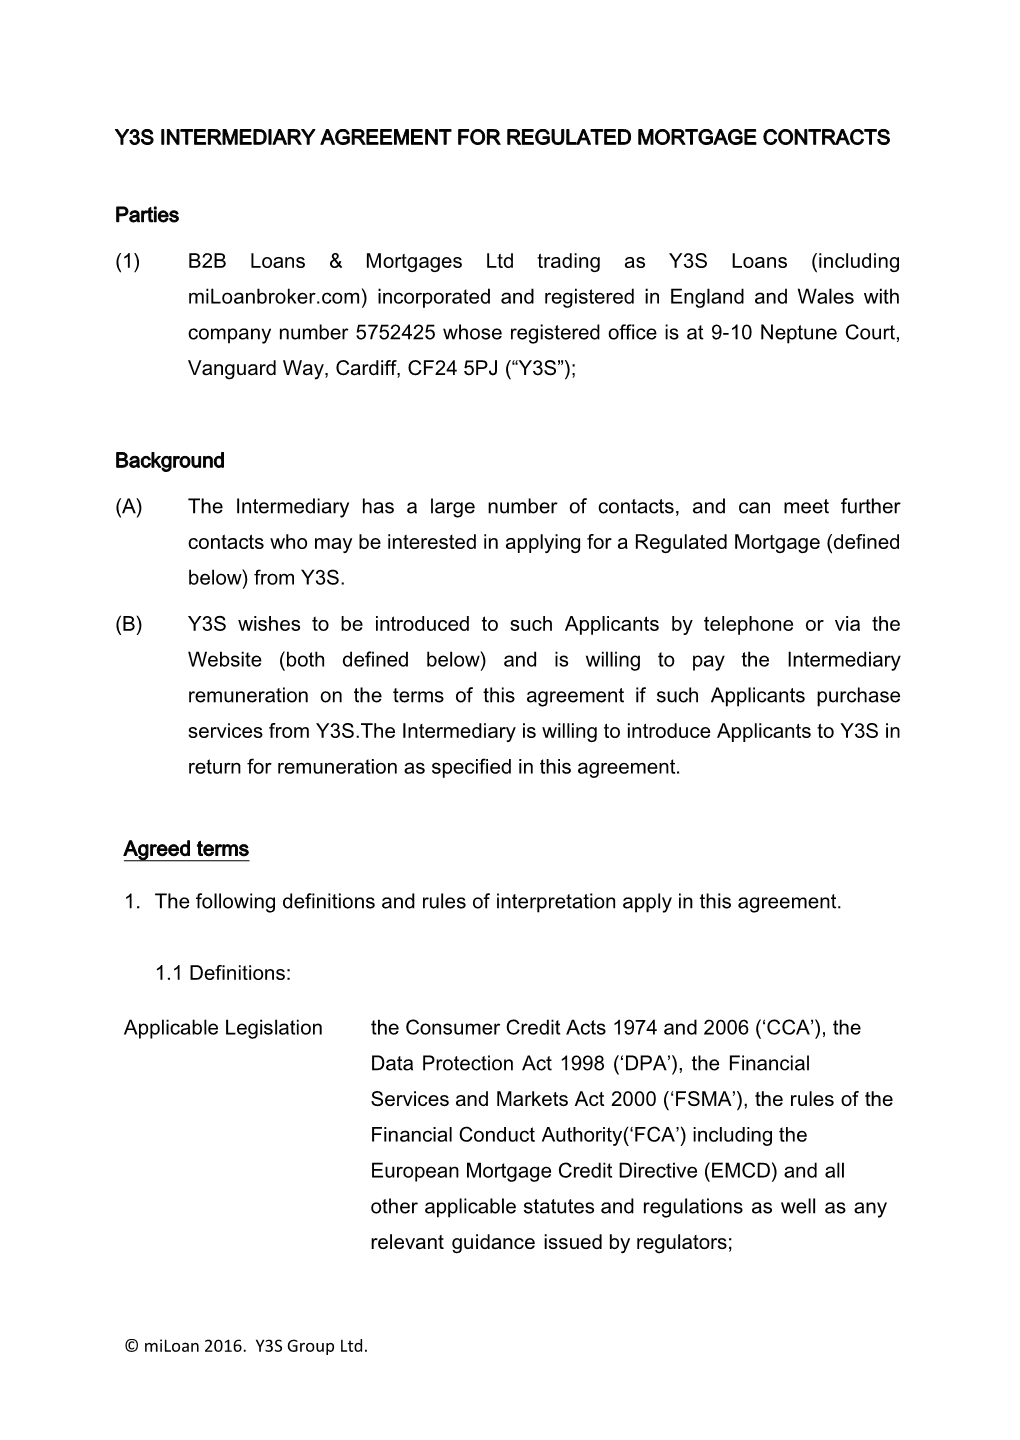 Y3s Intermediary Agreement for Regulated Mortgage Contracts